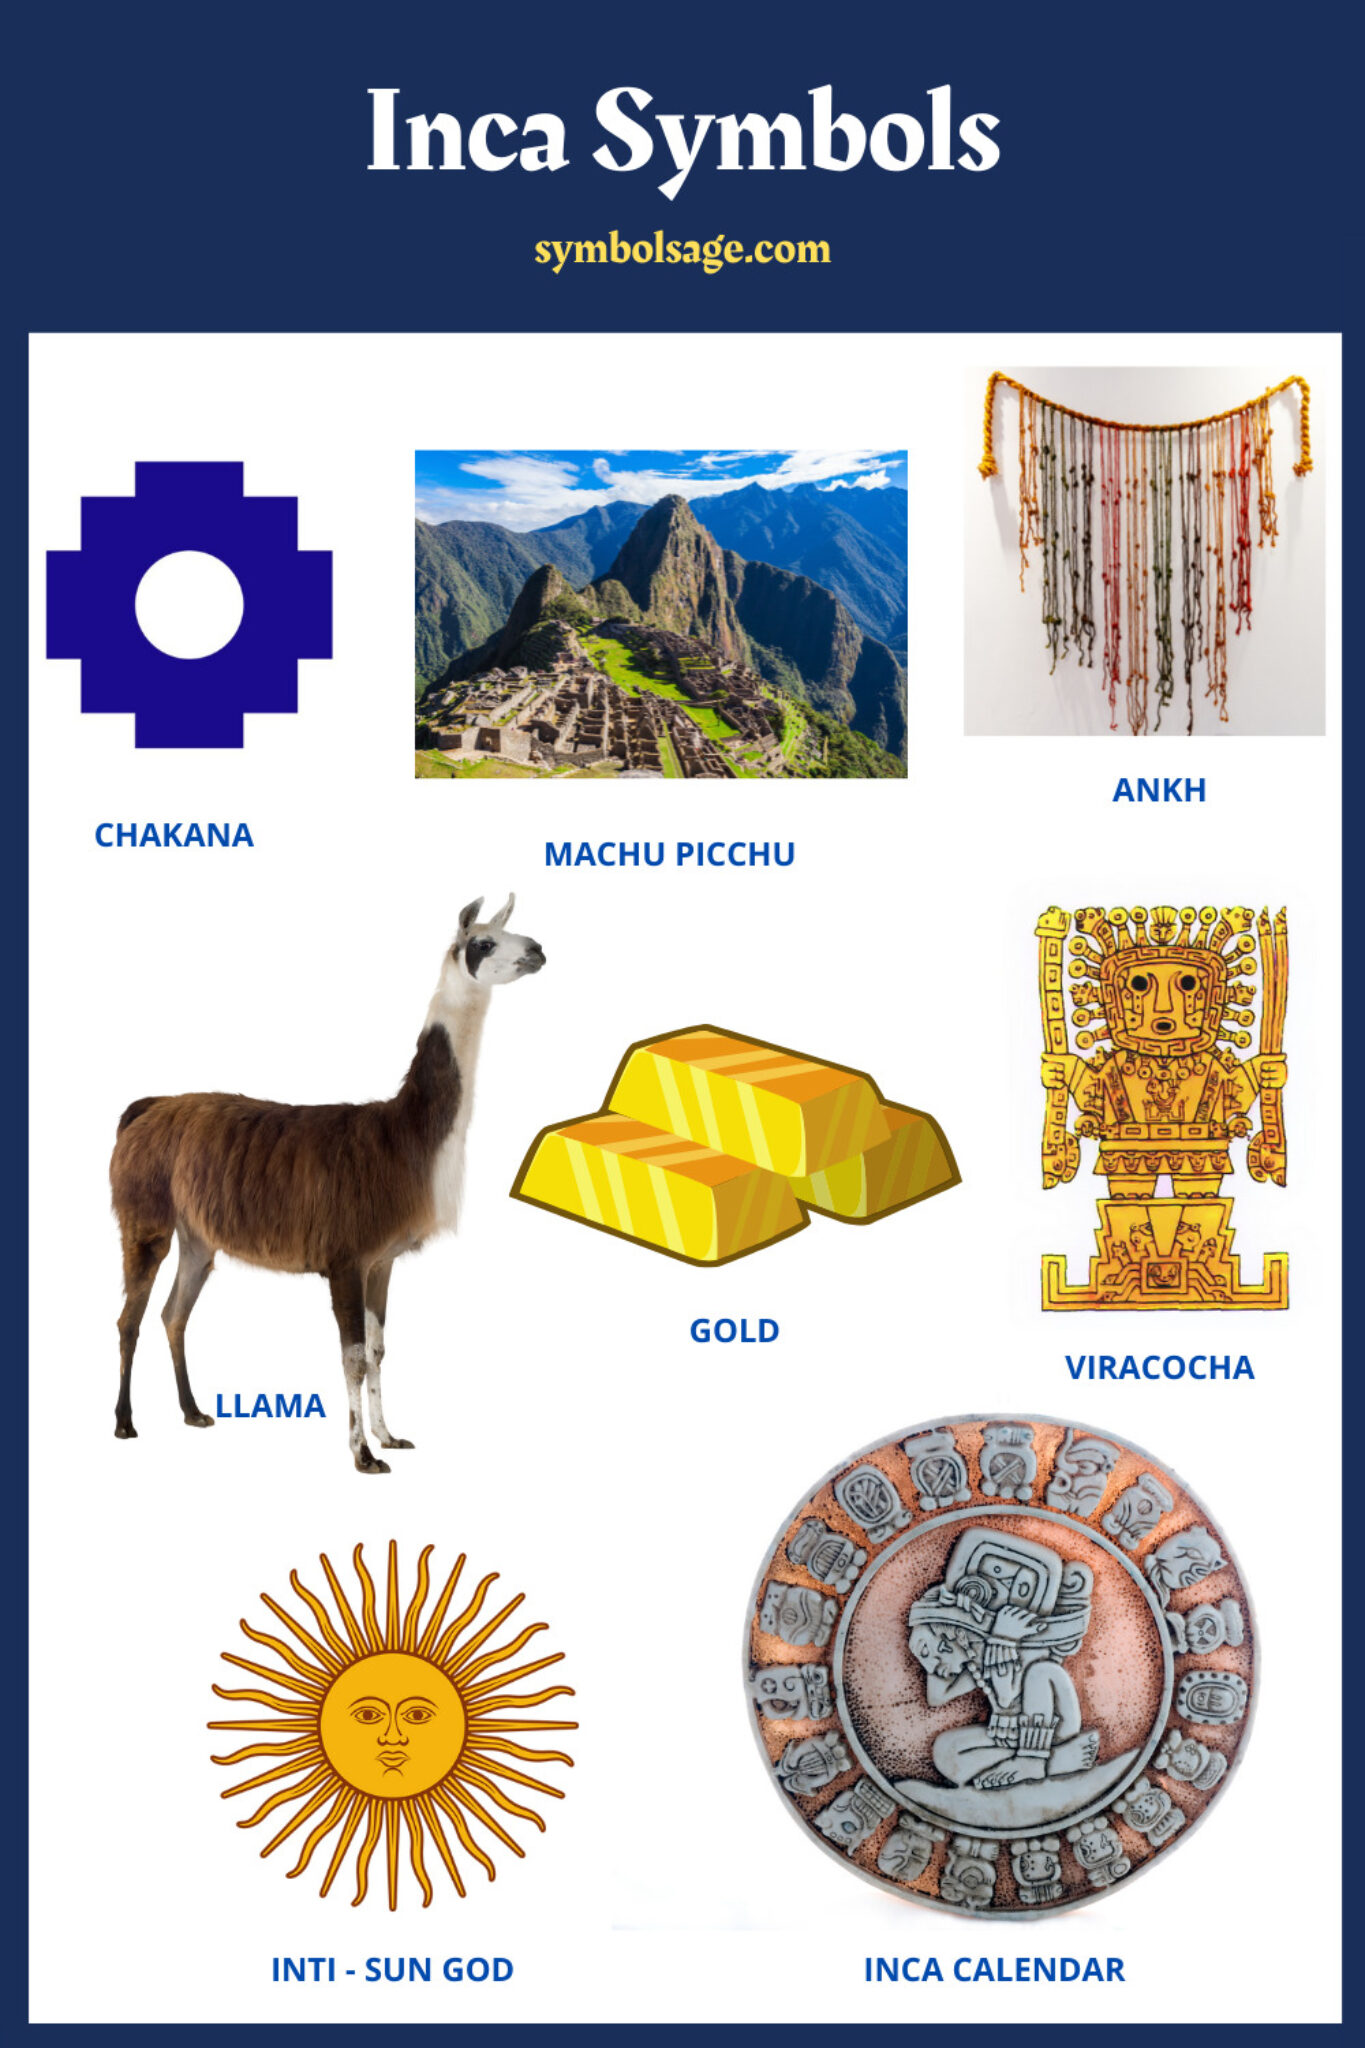 Top 9 Popular Inca Symbols and Their Meanings